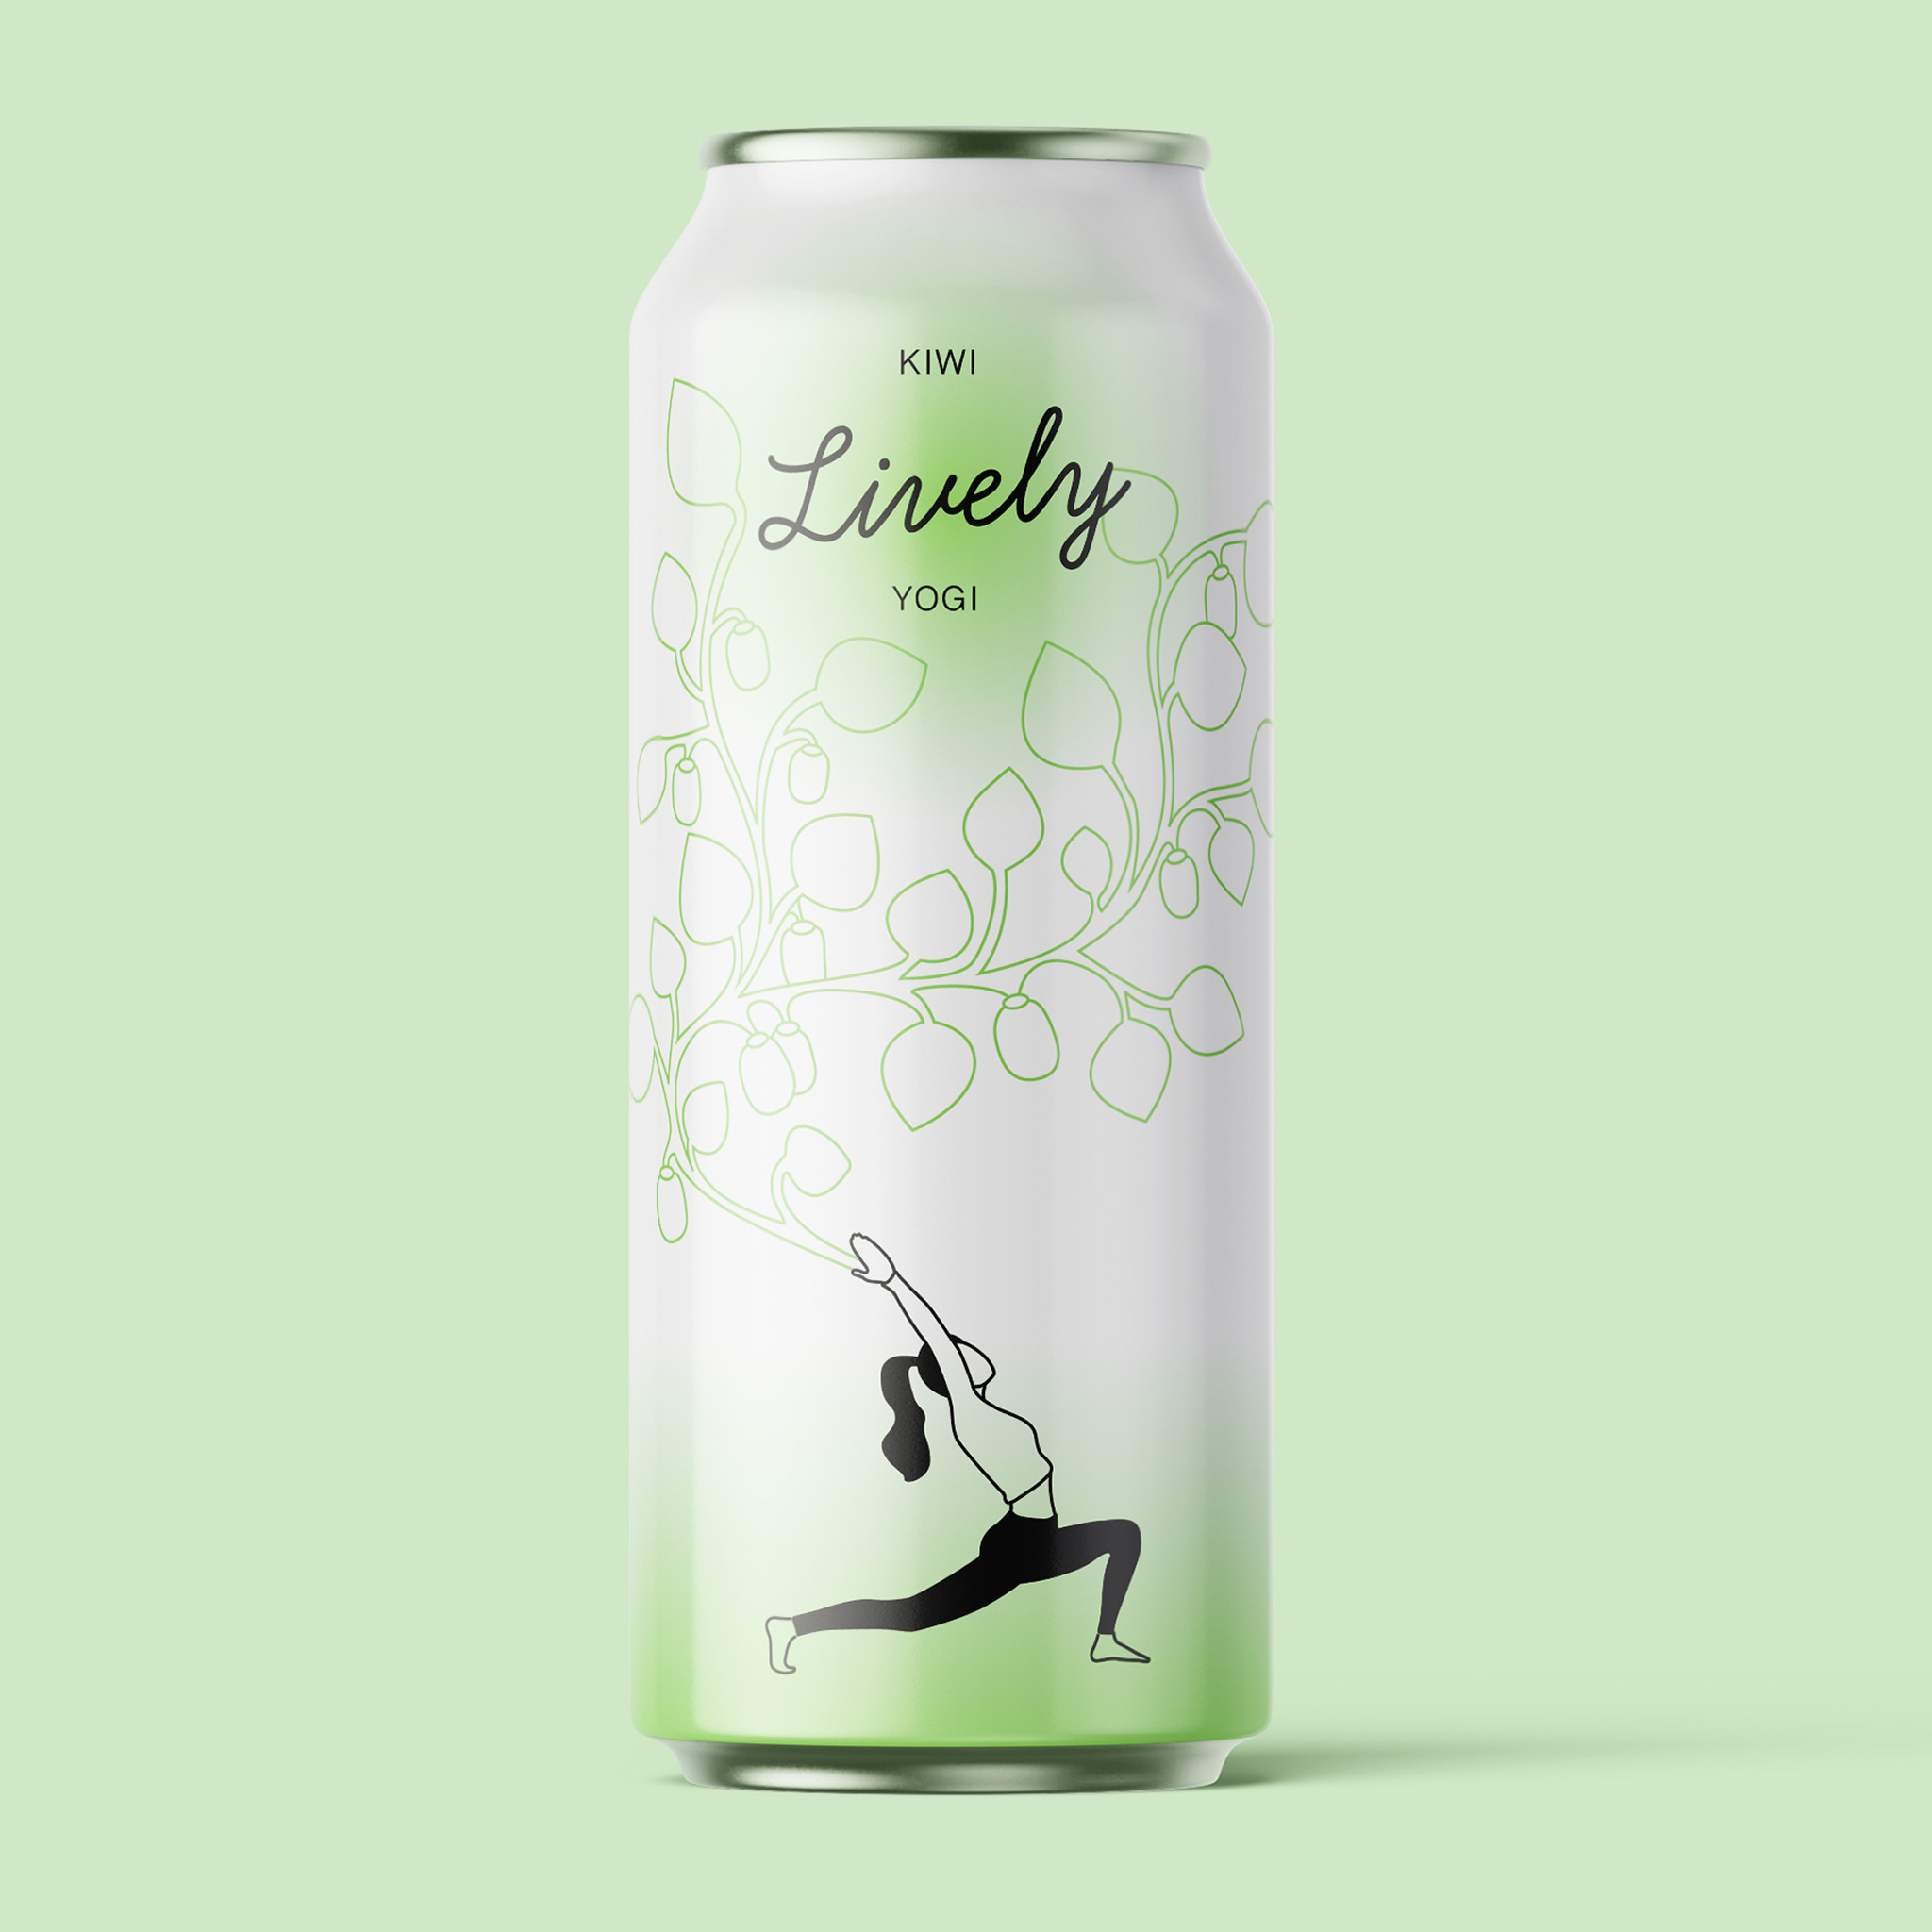 Mockup of packaging design for an imagined all-natural energy drink. This image is an example of my goals, more precisely, of what I would like to create in my career.